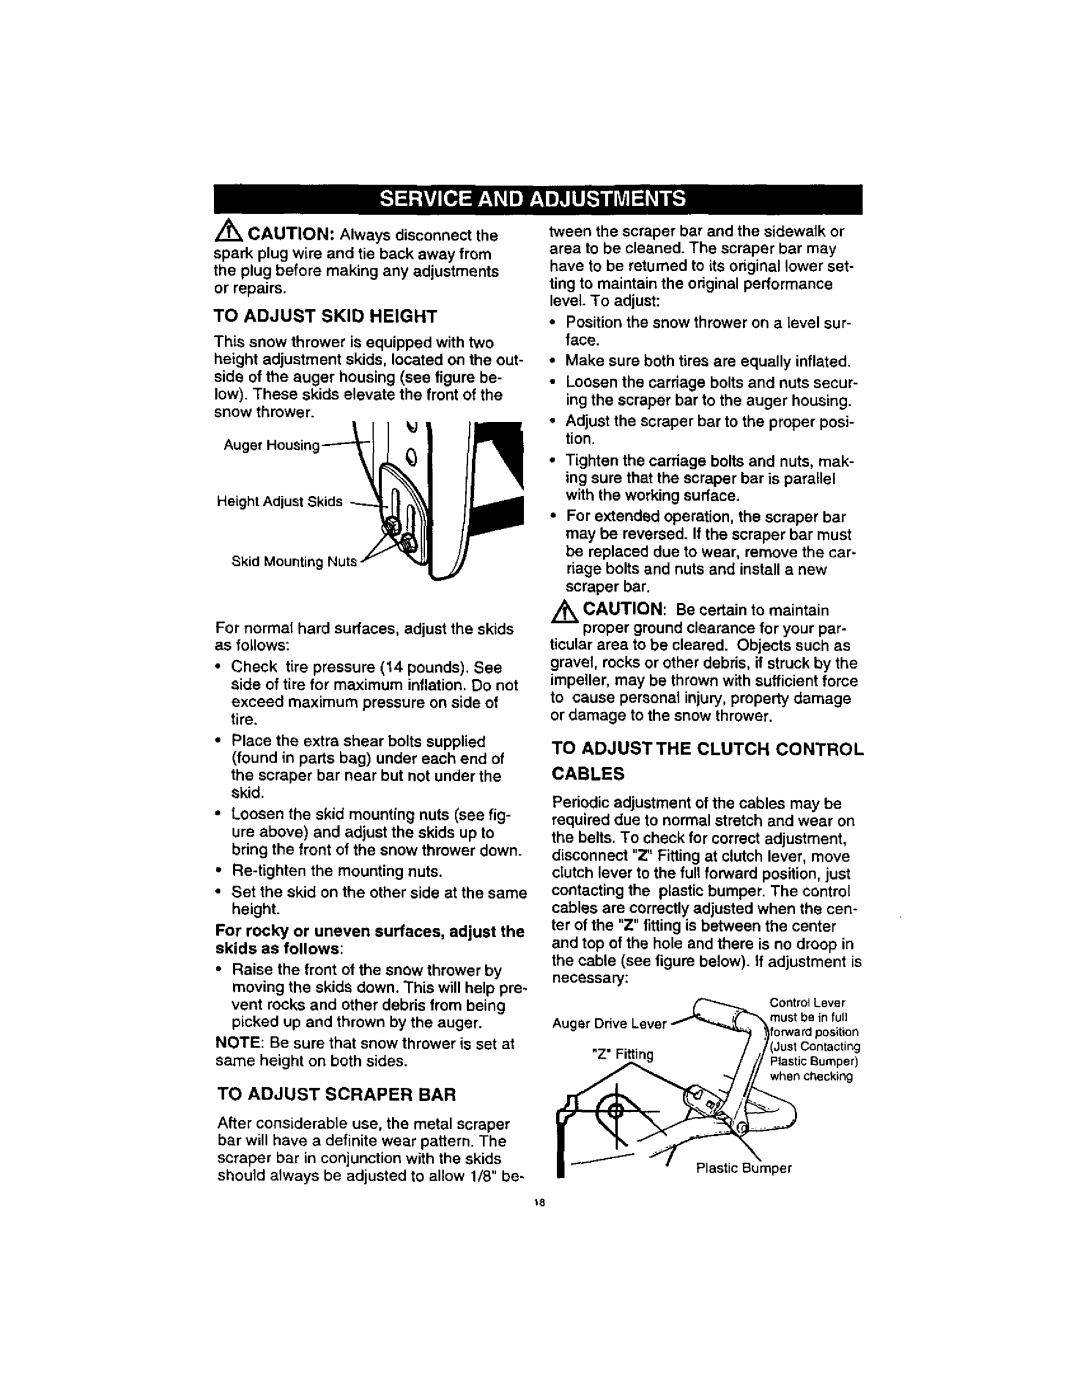 Craftsman 536.88123 operating instructions To Adjust Skid Height, To Adjust Scraper Bar, To Adjustthe Clutch Control Cables 